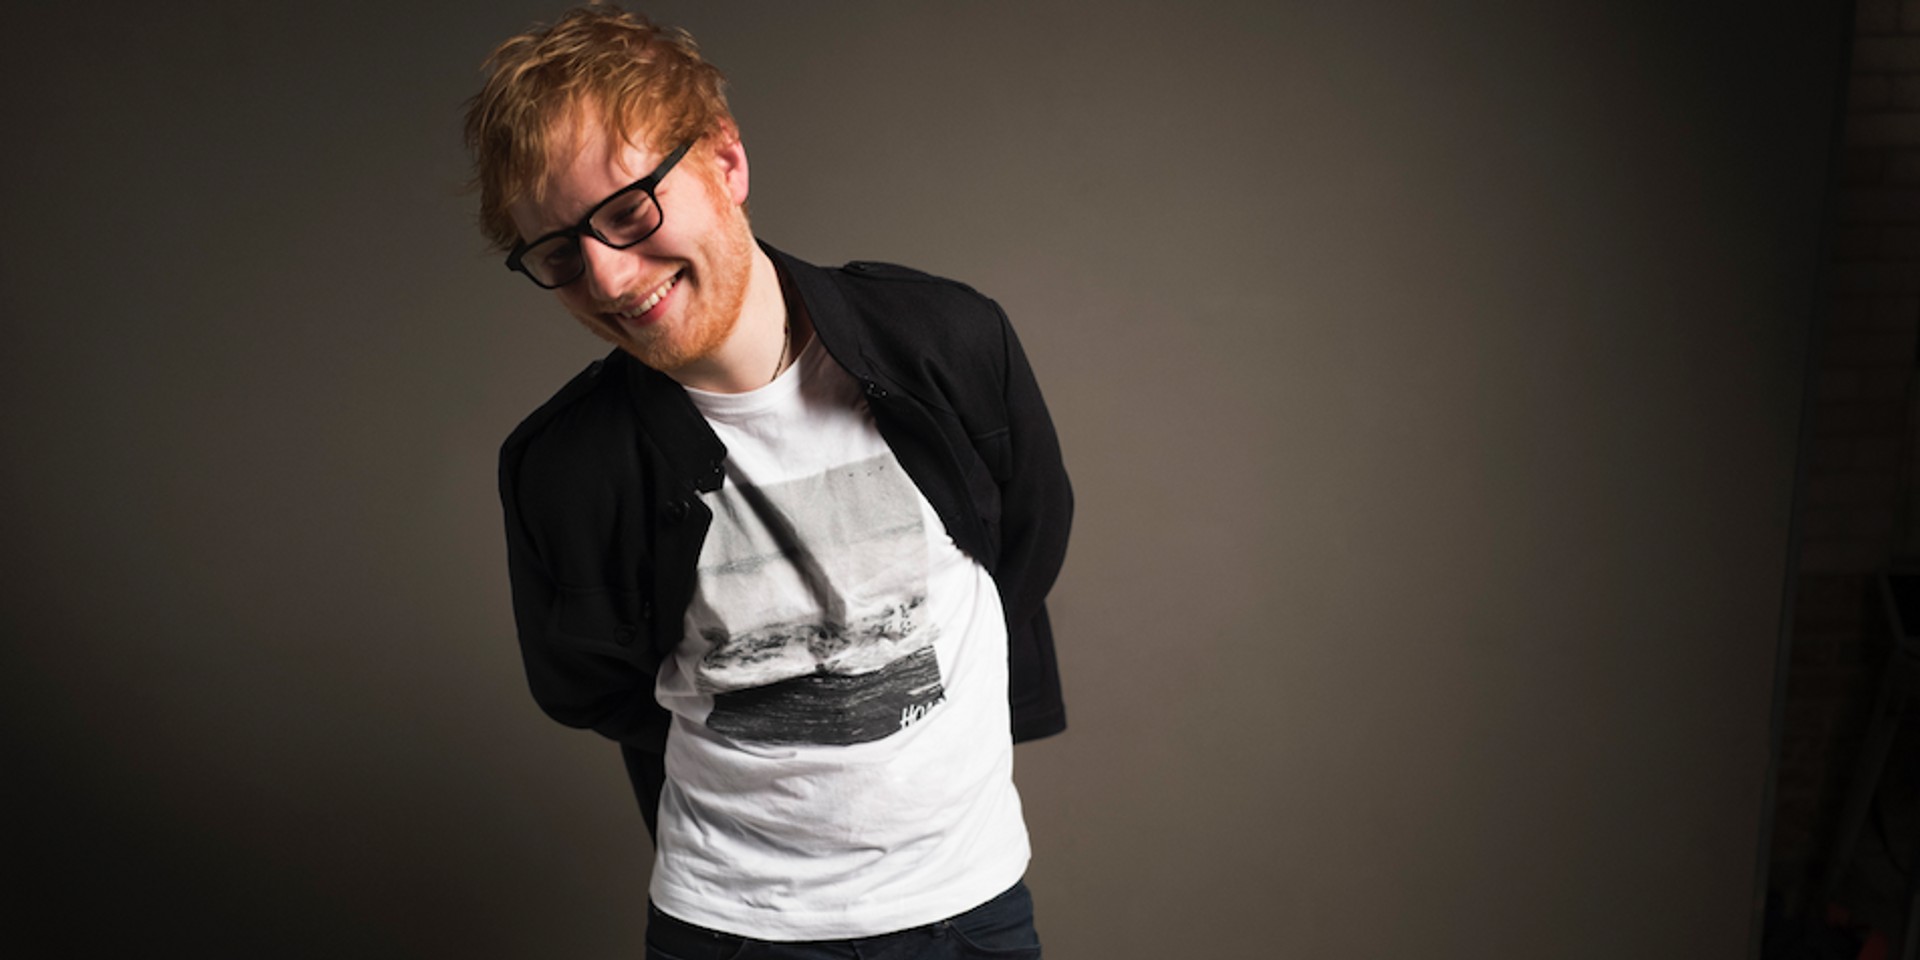 Attention, Sheerios! Don't miss Ed Sheeran's 'Divide' Weekend!